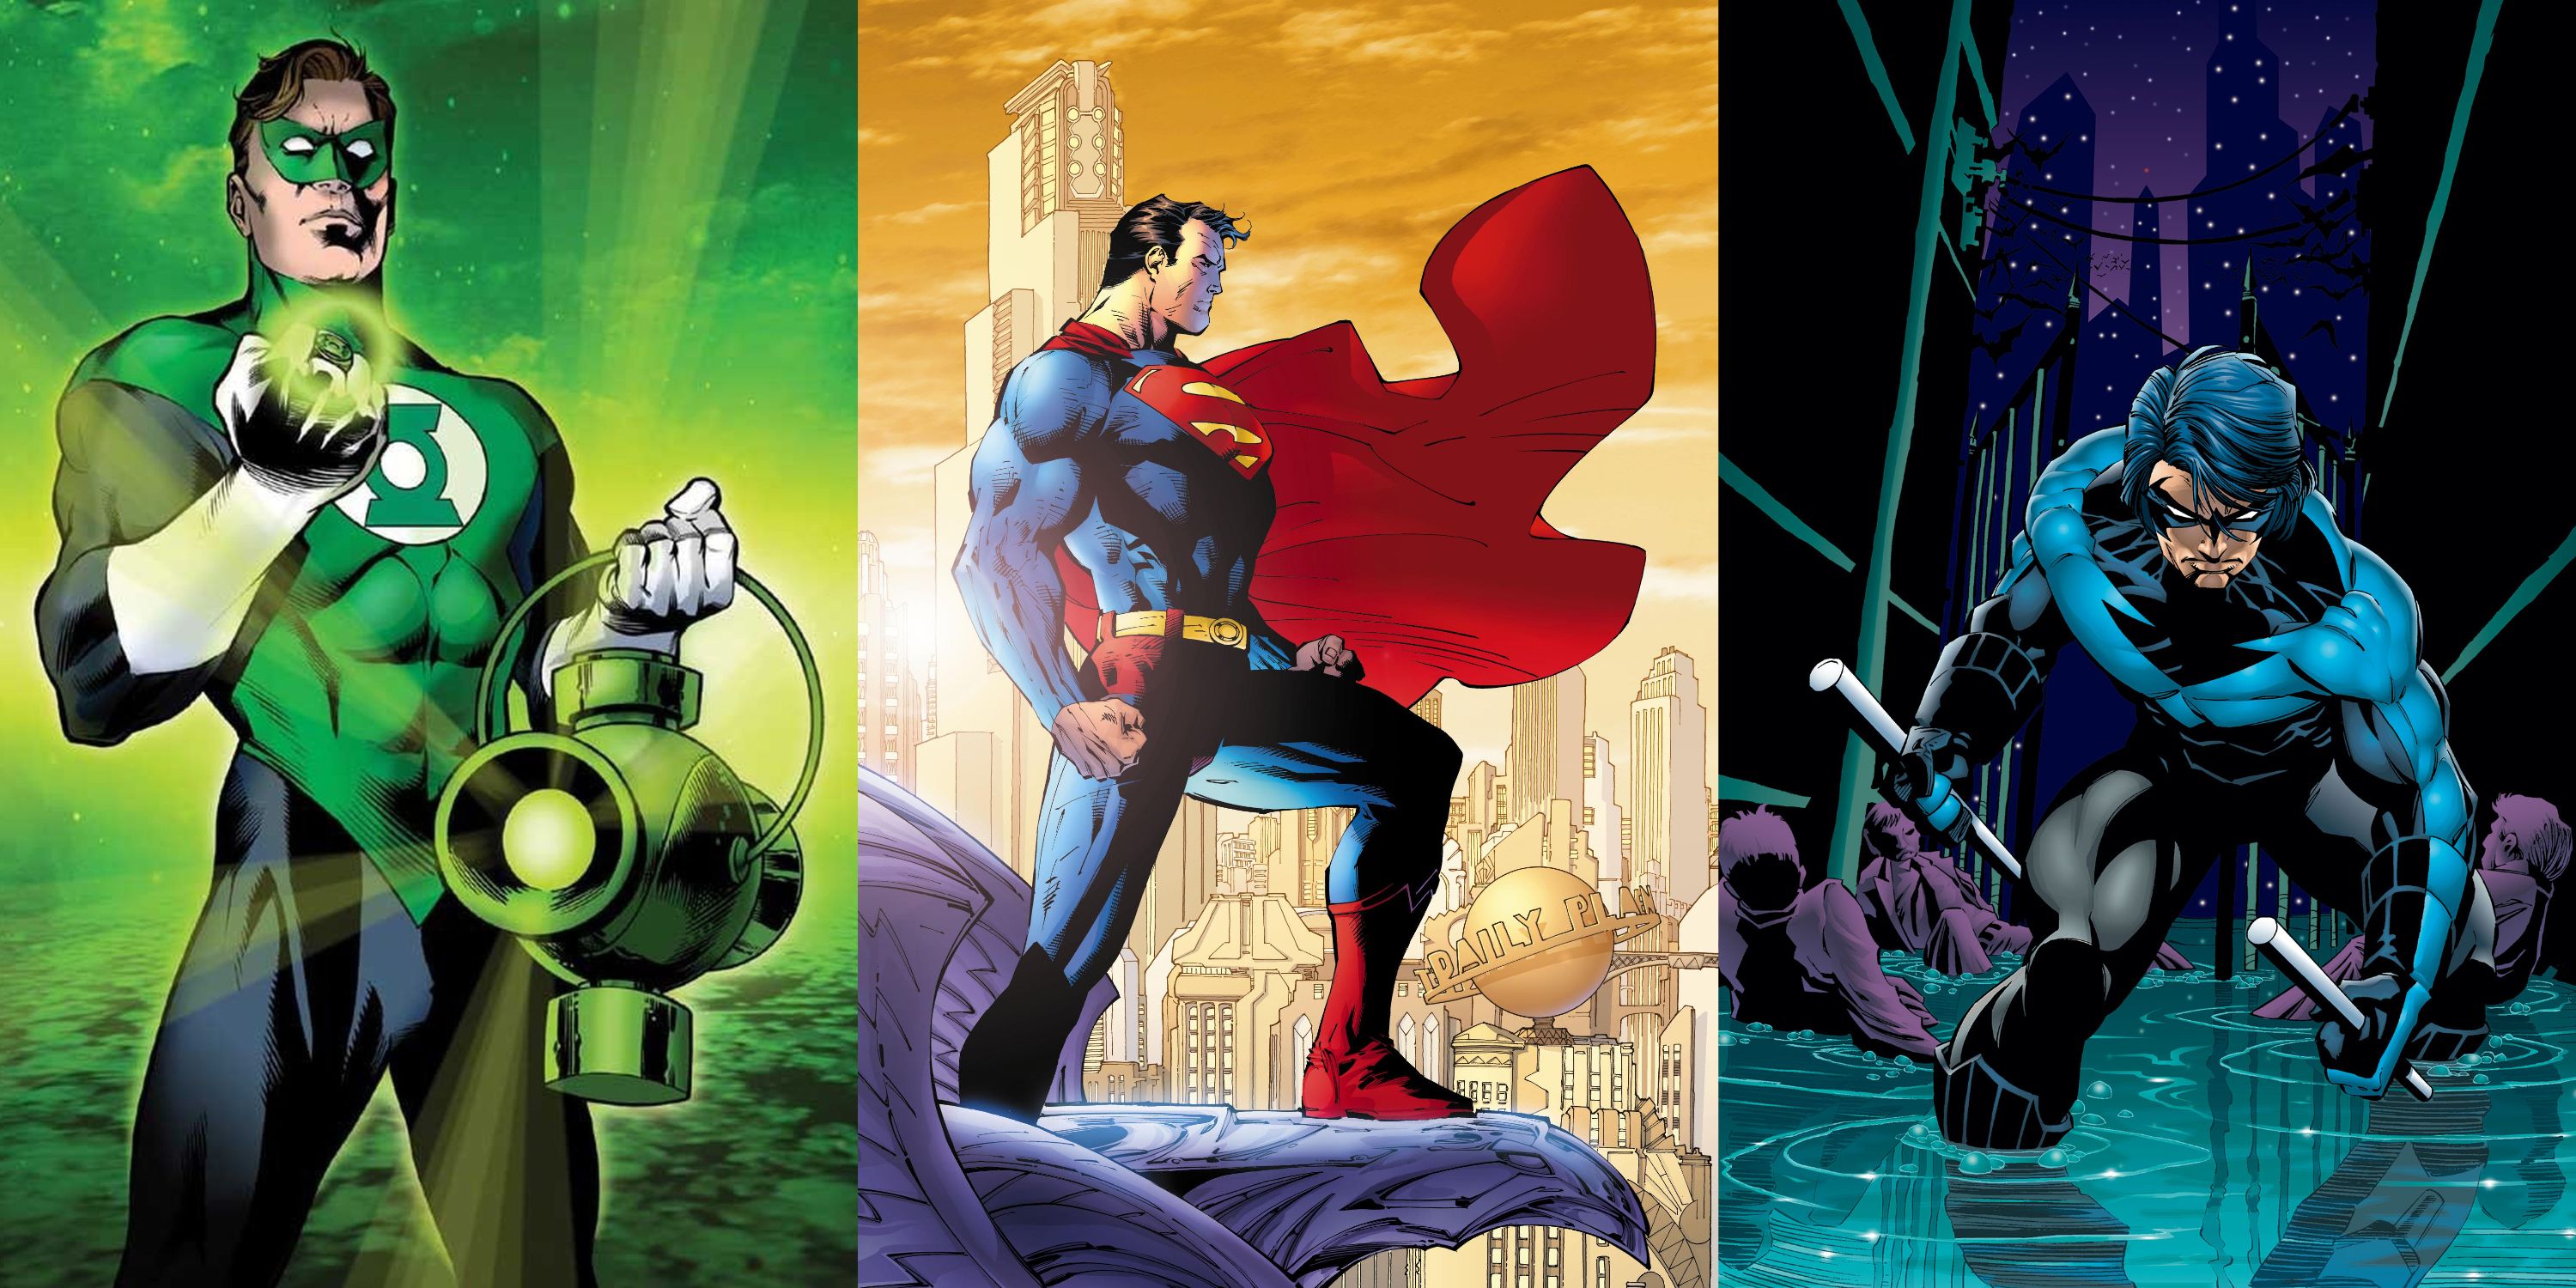 Split image: Hal Jordan with a power battery, Superman standing over Metropolis, and Nightwing in an alley